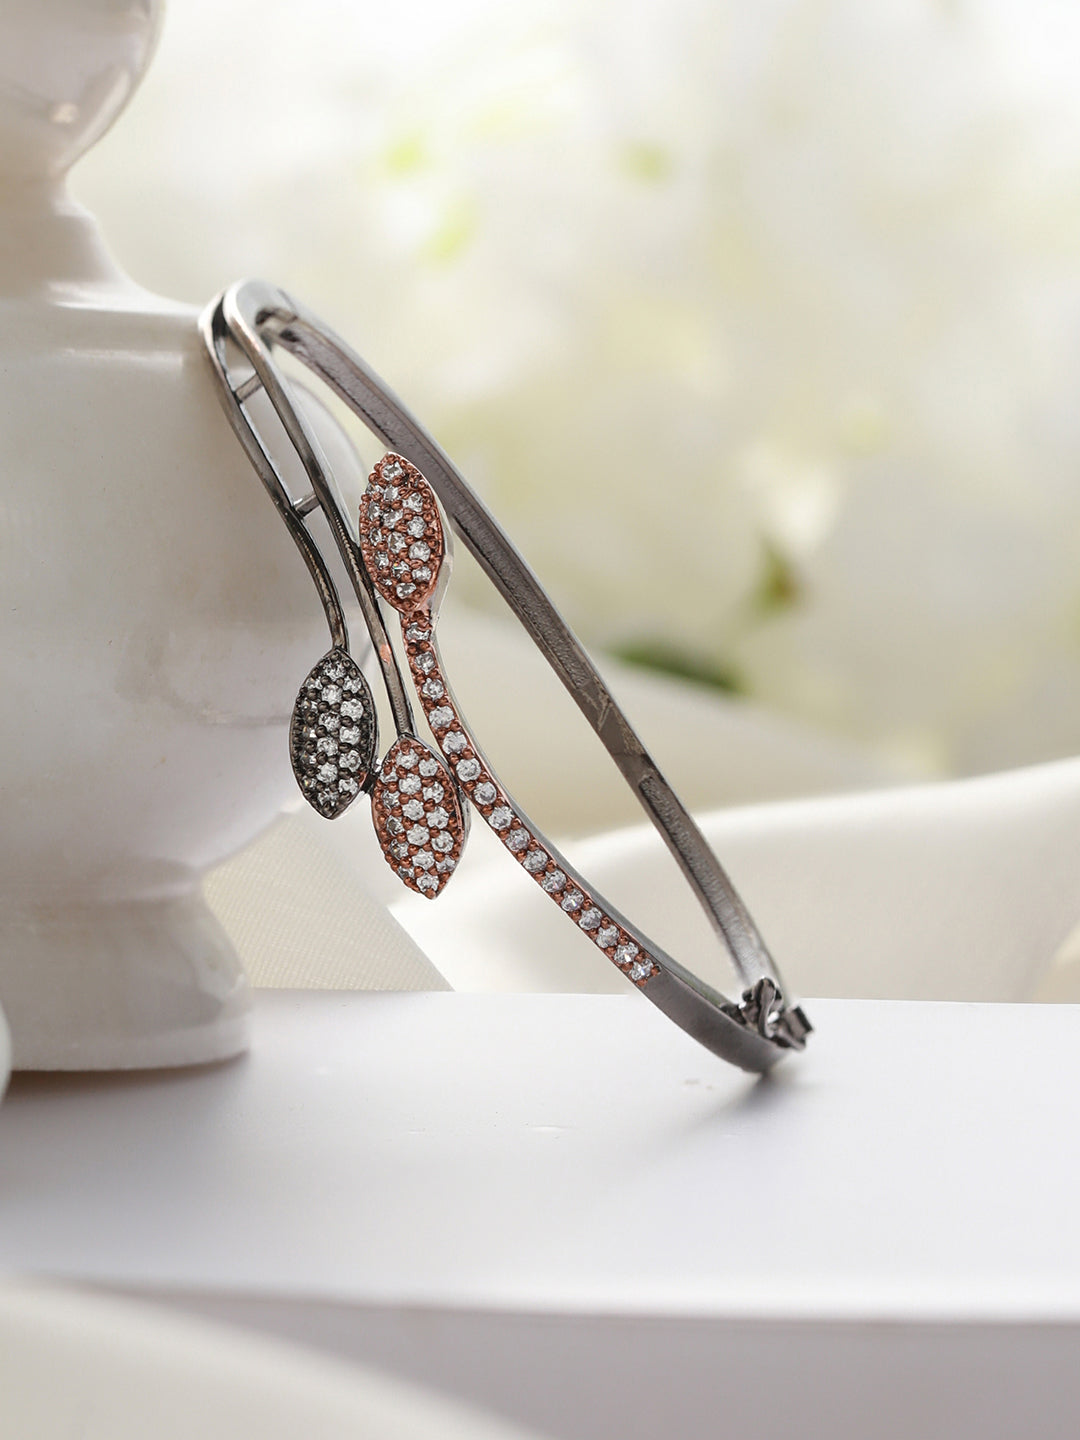 Linking Leaves AD Rose Gold Silver-Plated Bracelet